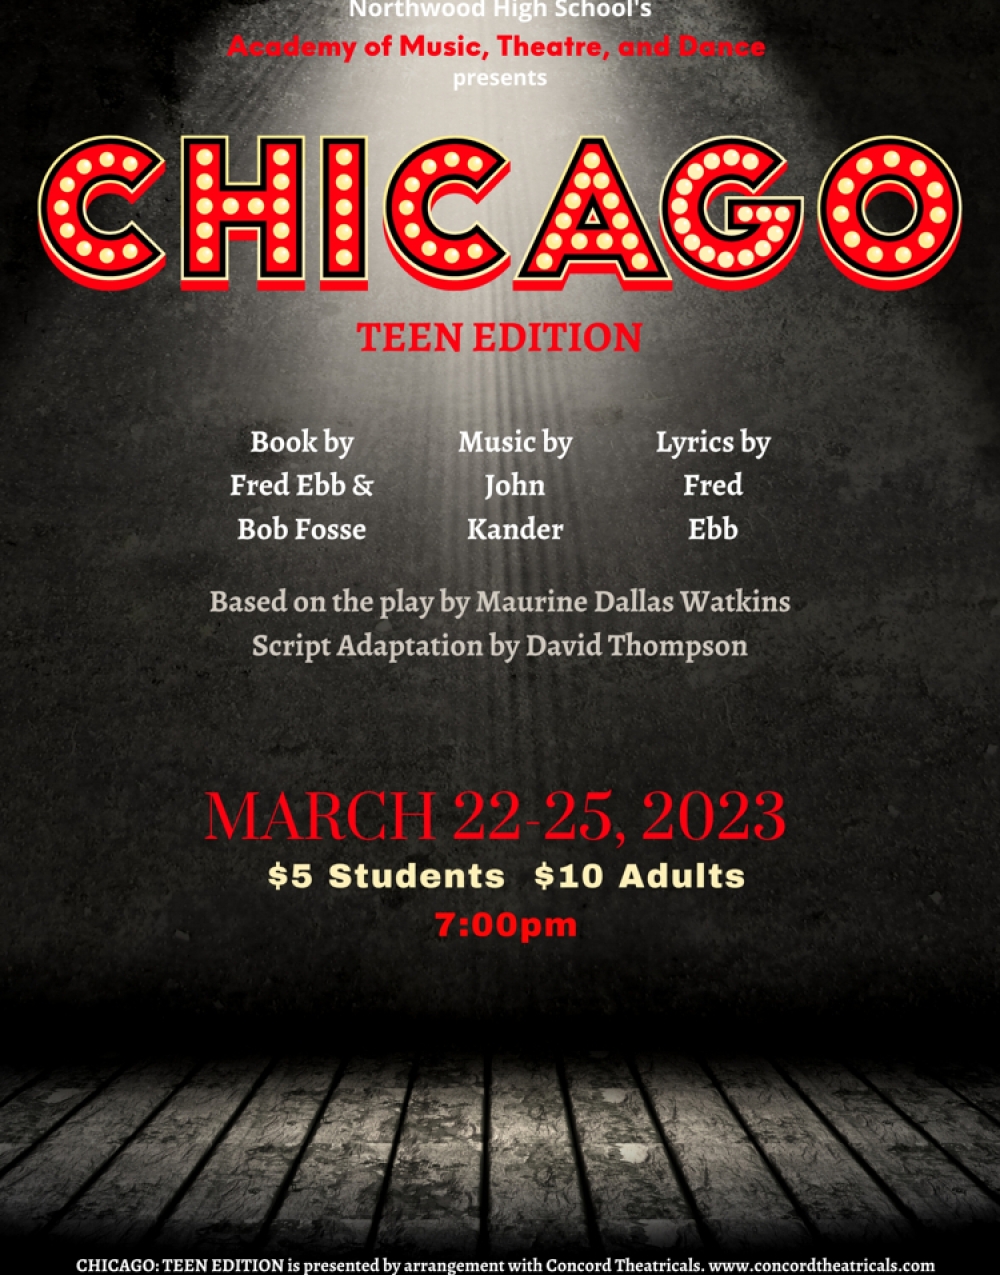 Chicago: Teen Edition - Northwood High School Stage Mag